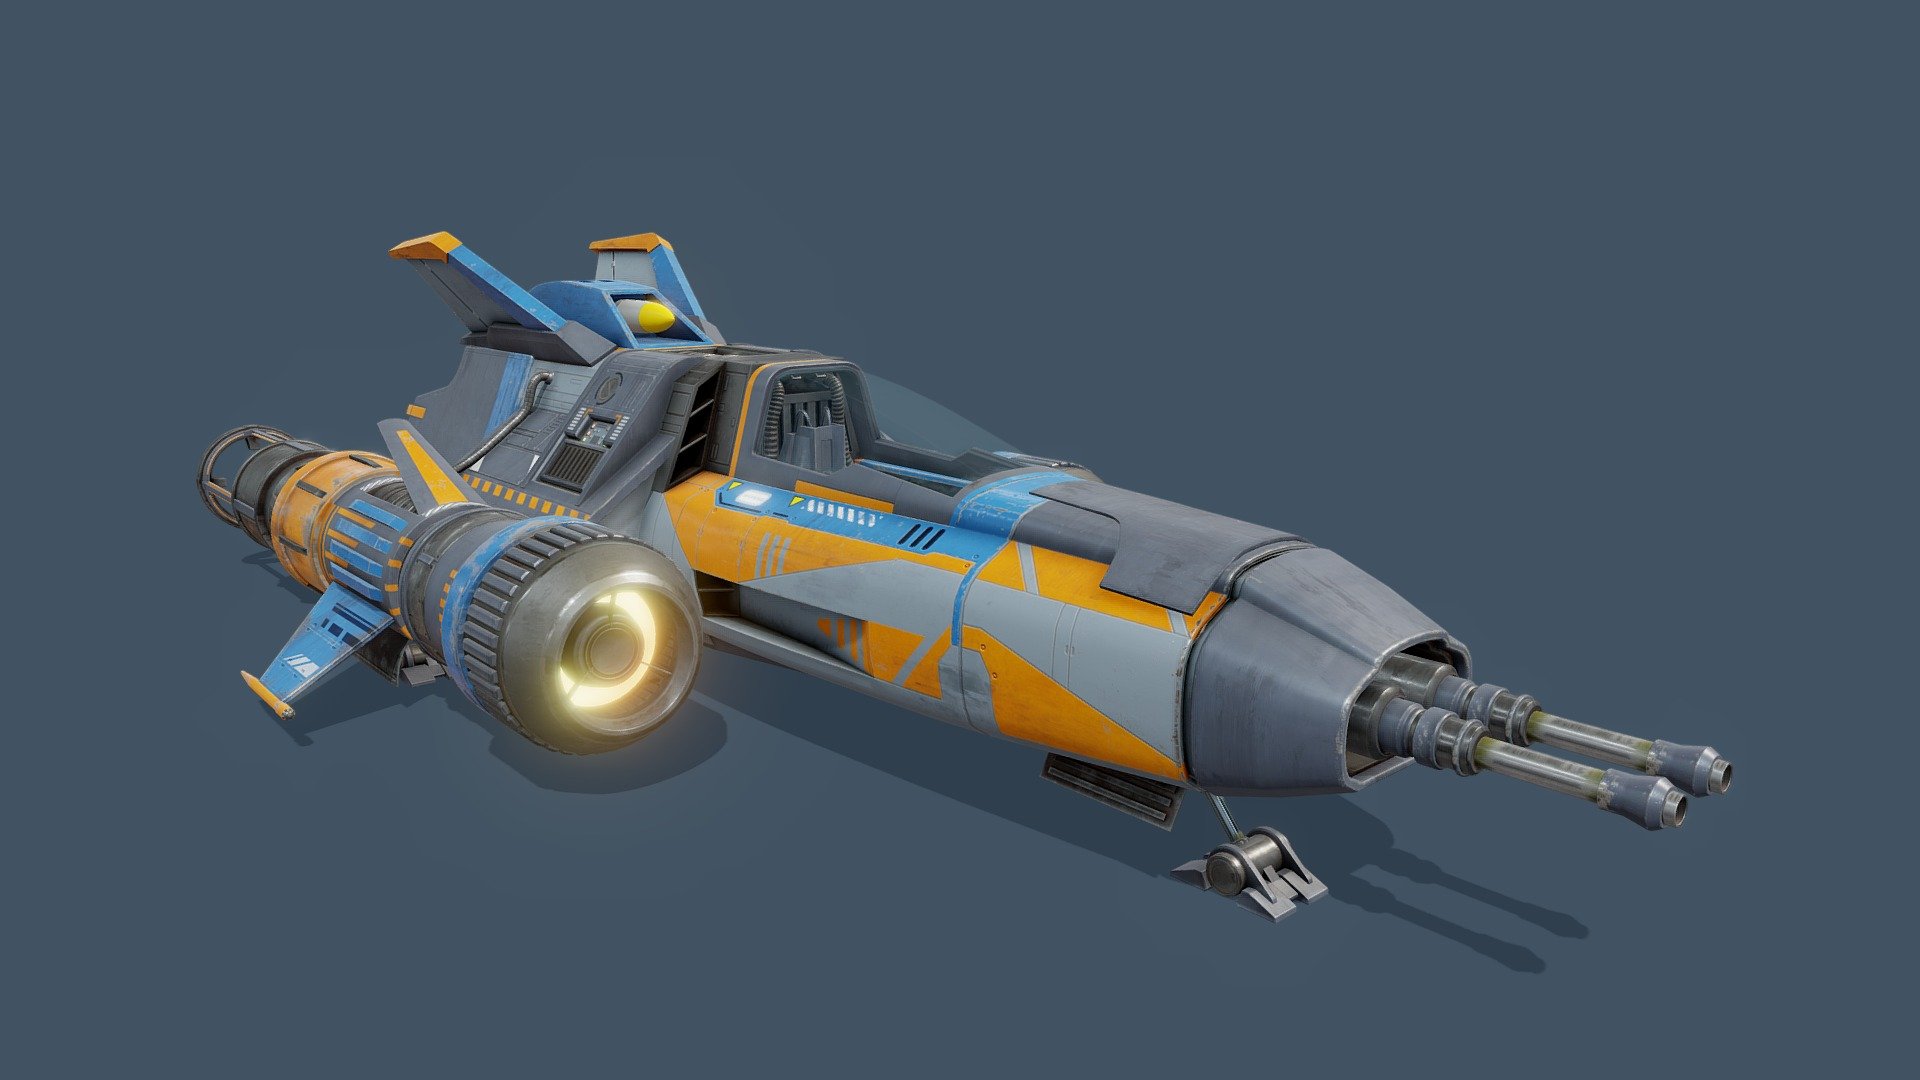 Custom version of a Starfighter based on a few Sci Fi ships and some parts of my own design. 

139k Tri's 71k Poly's

4096 textures.  5 Materials  because I have made the glass seperate but it uses the same textures as CF_PartA

Baked textures are included in case people want to use a program like substance painter to retexture the model.

Download includes a Zip with Textures in correct folders so they are easy to understand.  And includes 4 versions of the model.  3 attached meshes, one with cockpit closed, one in  flight mode with landing gear folded away, one landed with cockpit open, and a version with parts unattached, pivots added to landing gear and cockpit hatch, so they can be taken into a 3d program and animated.

MAKE SURE TO DOWNLOAD THE ADDITIONAL FILE LINK It contains all the proper models and textures in the right folders

DO NOT RESELL - Custom Starfighter V2 - Buy Royalty Free 3D model by Philip Gilbert (@PhilipAGilbert) 3d model